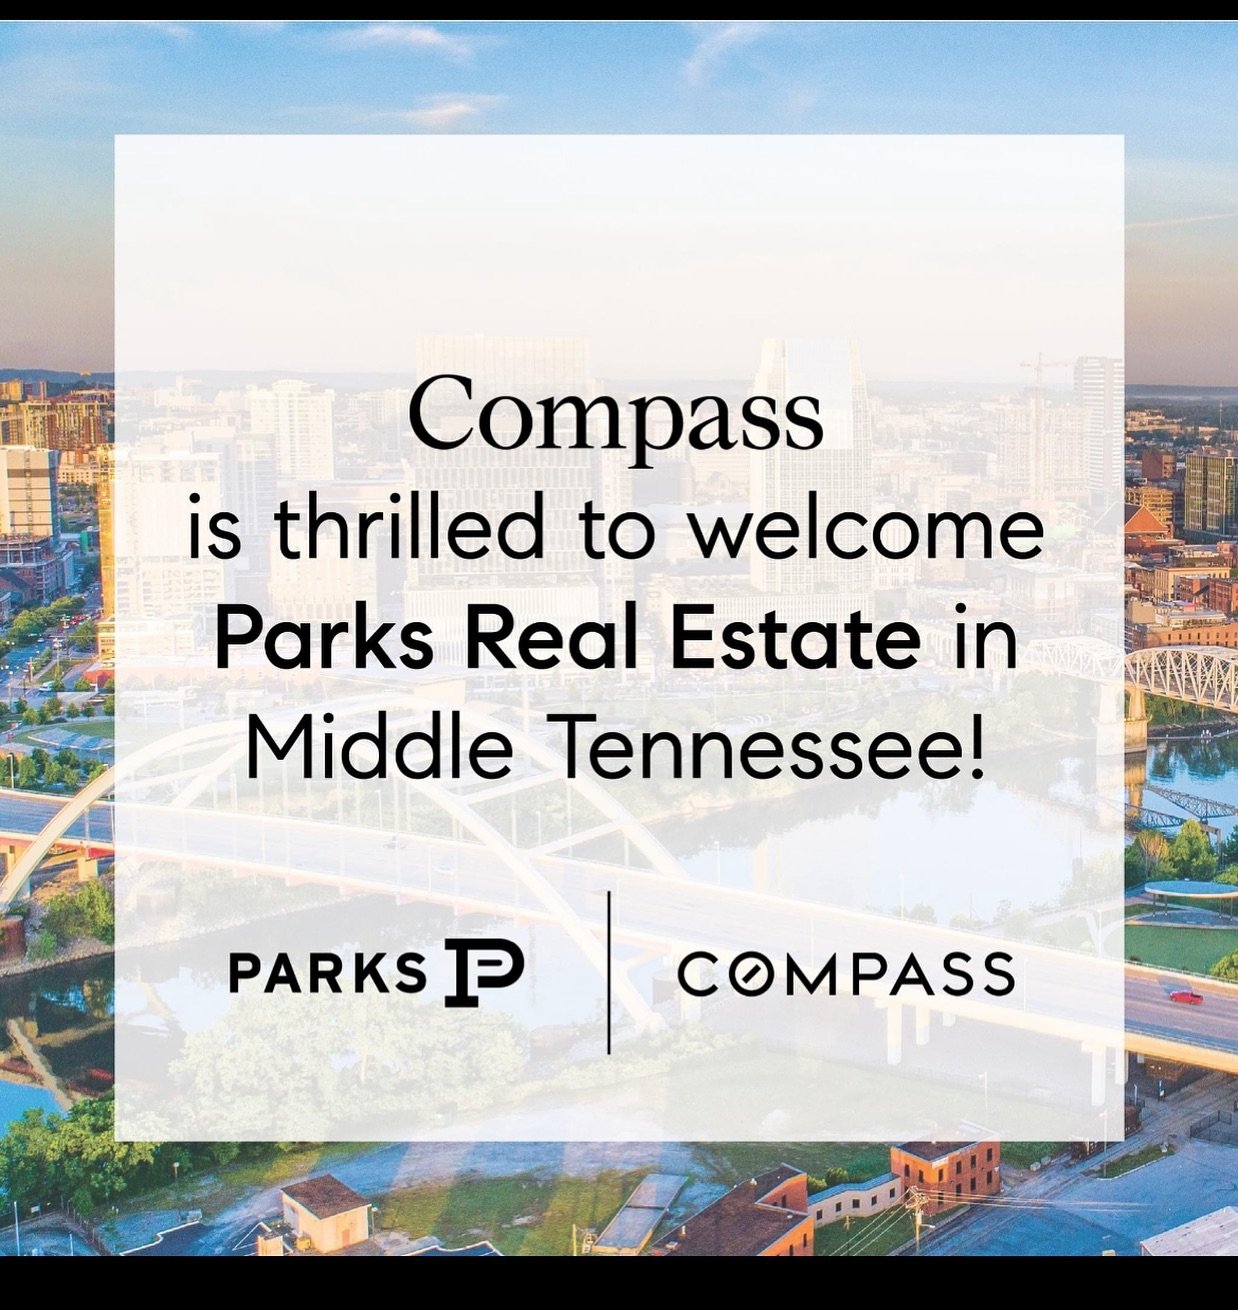 We are so thrilled to announce Compass and Parks Real Estate combining forces here in our beautiful city of Nashville! Being the top leading brokerages in Luxury Real Estate provides endless opportunities for the advancements of the Nashville market 